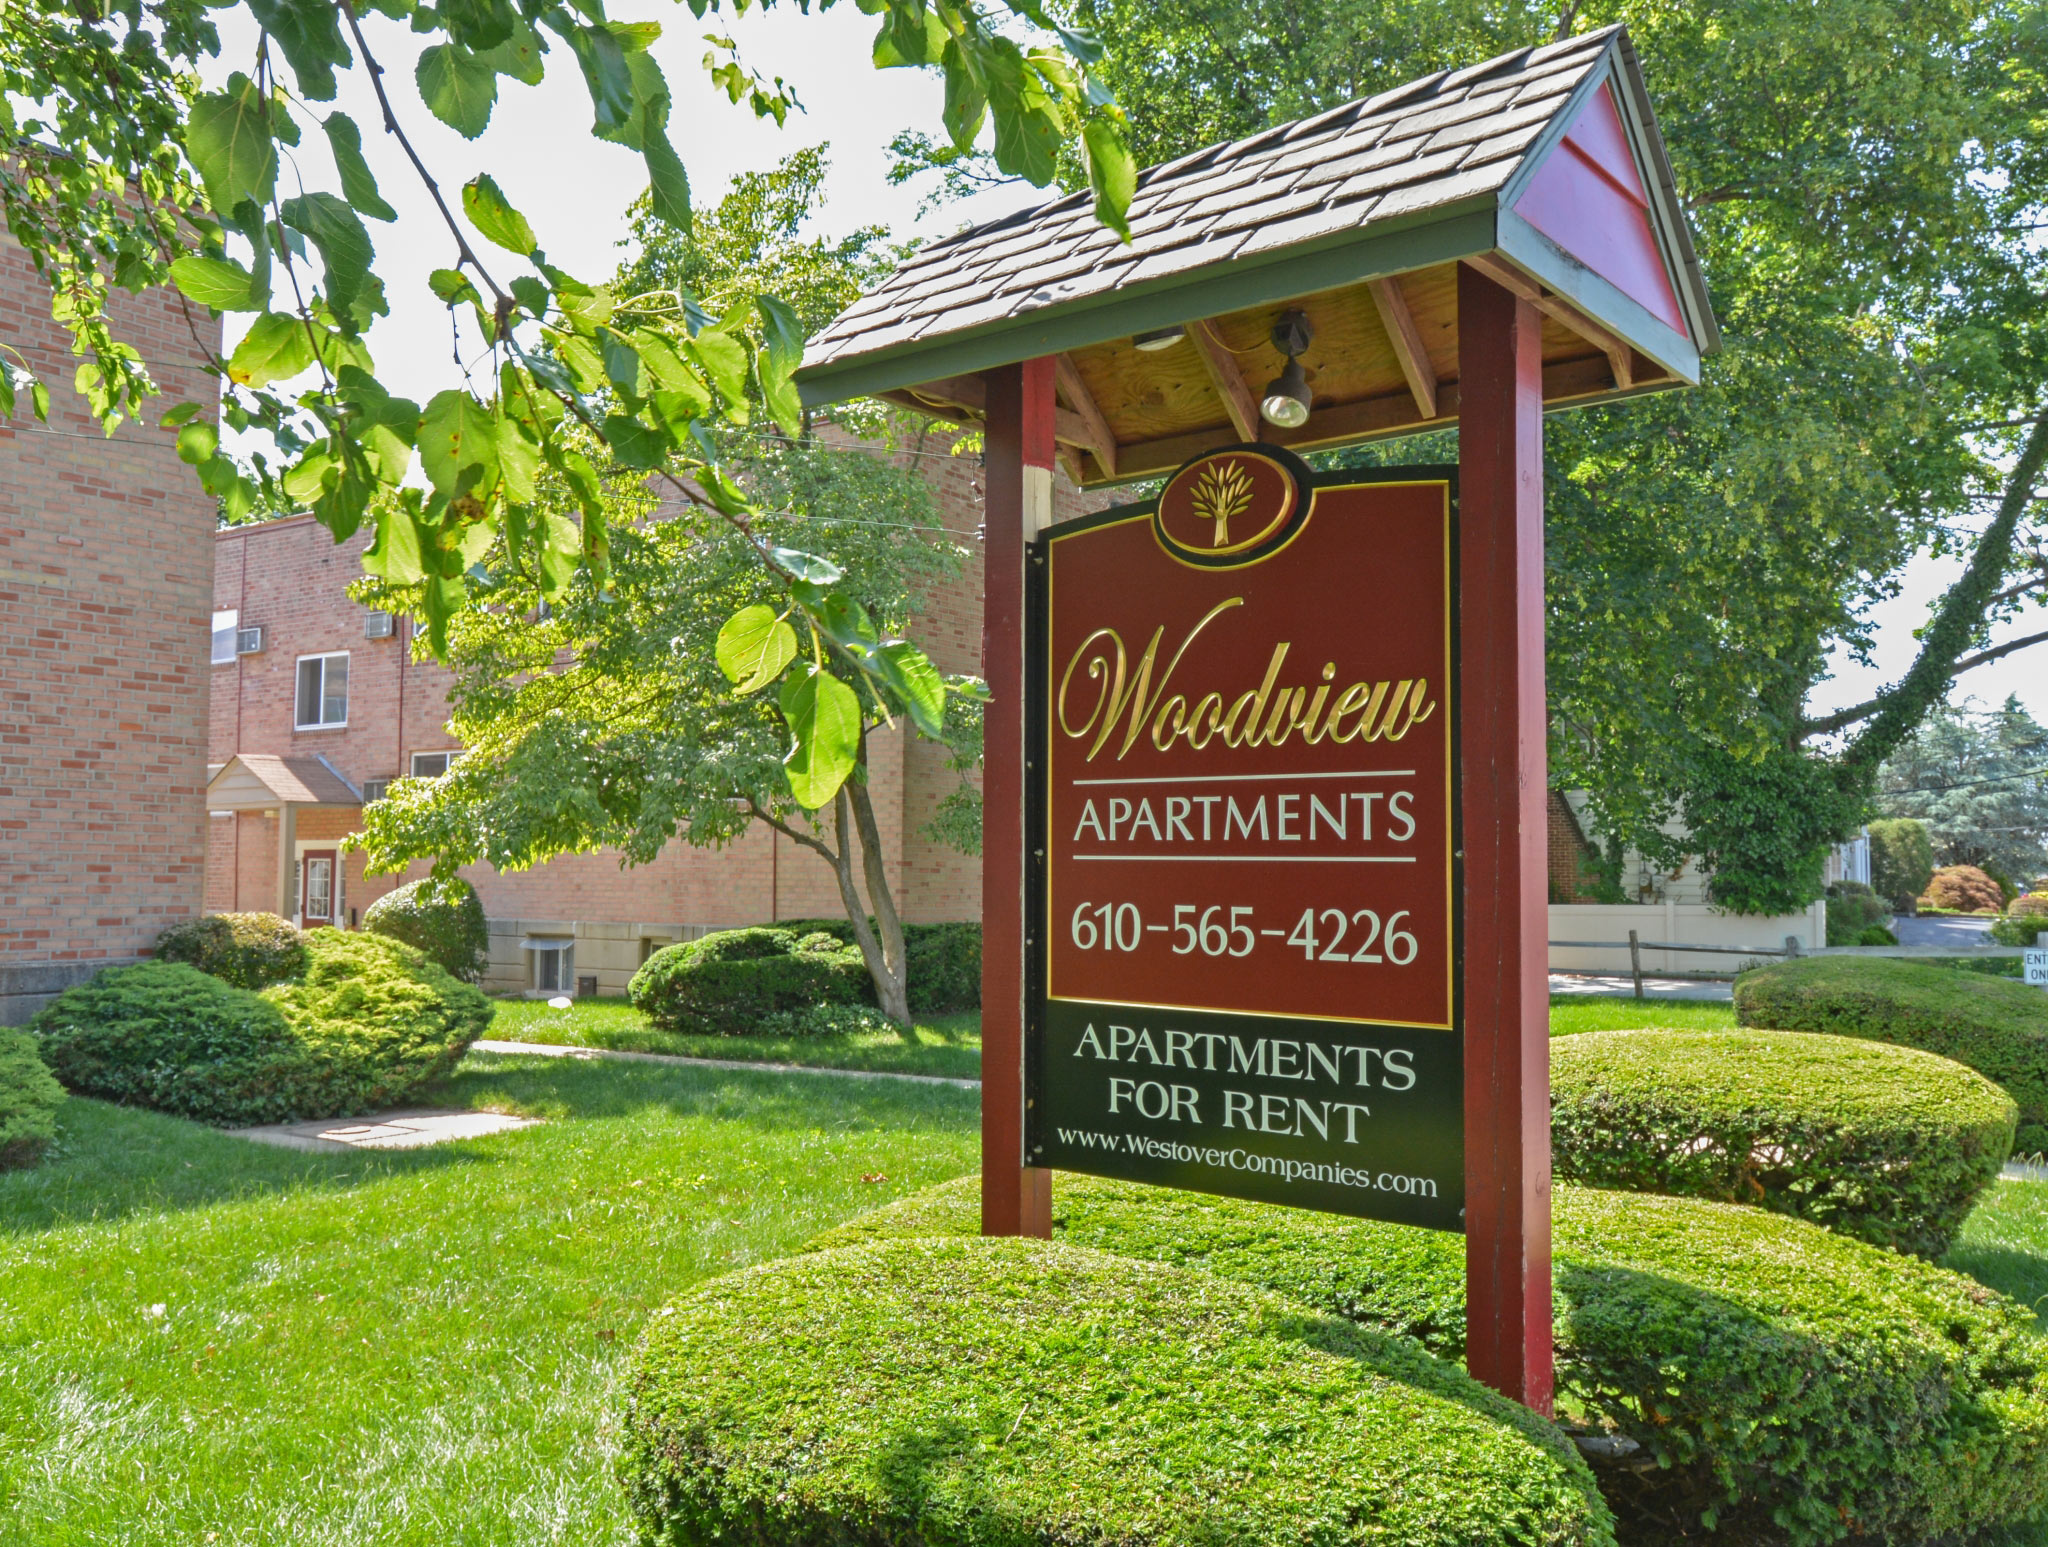 Woodview Apartments welcome sign